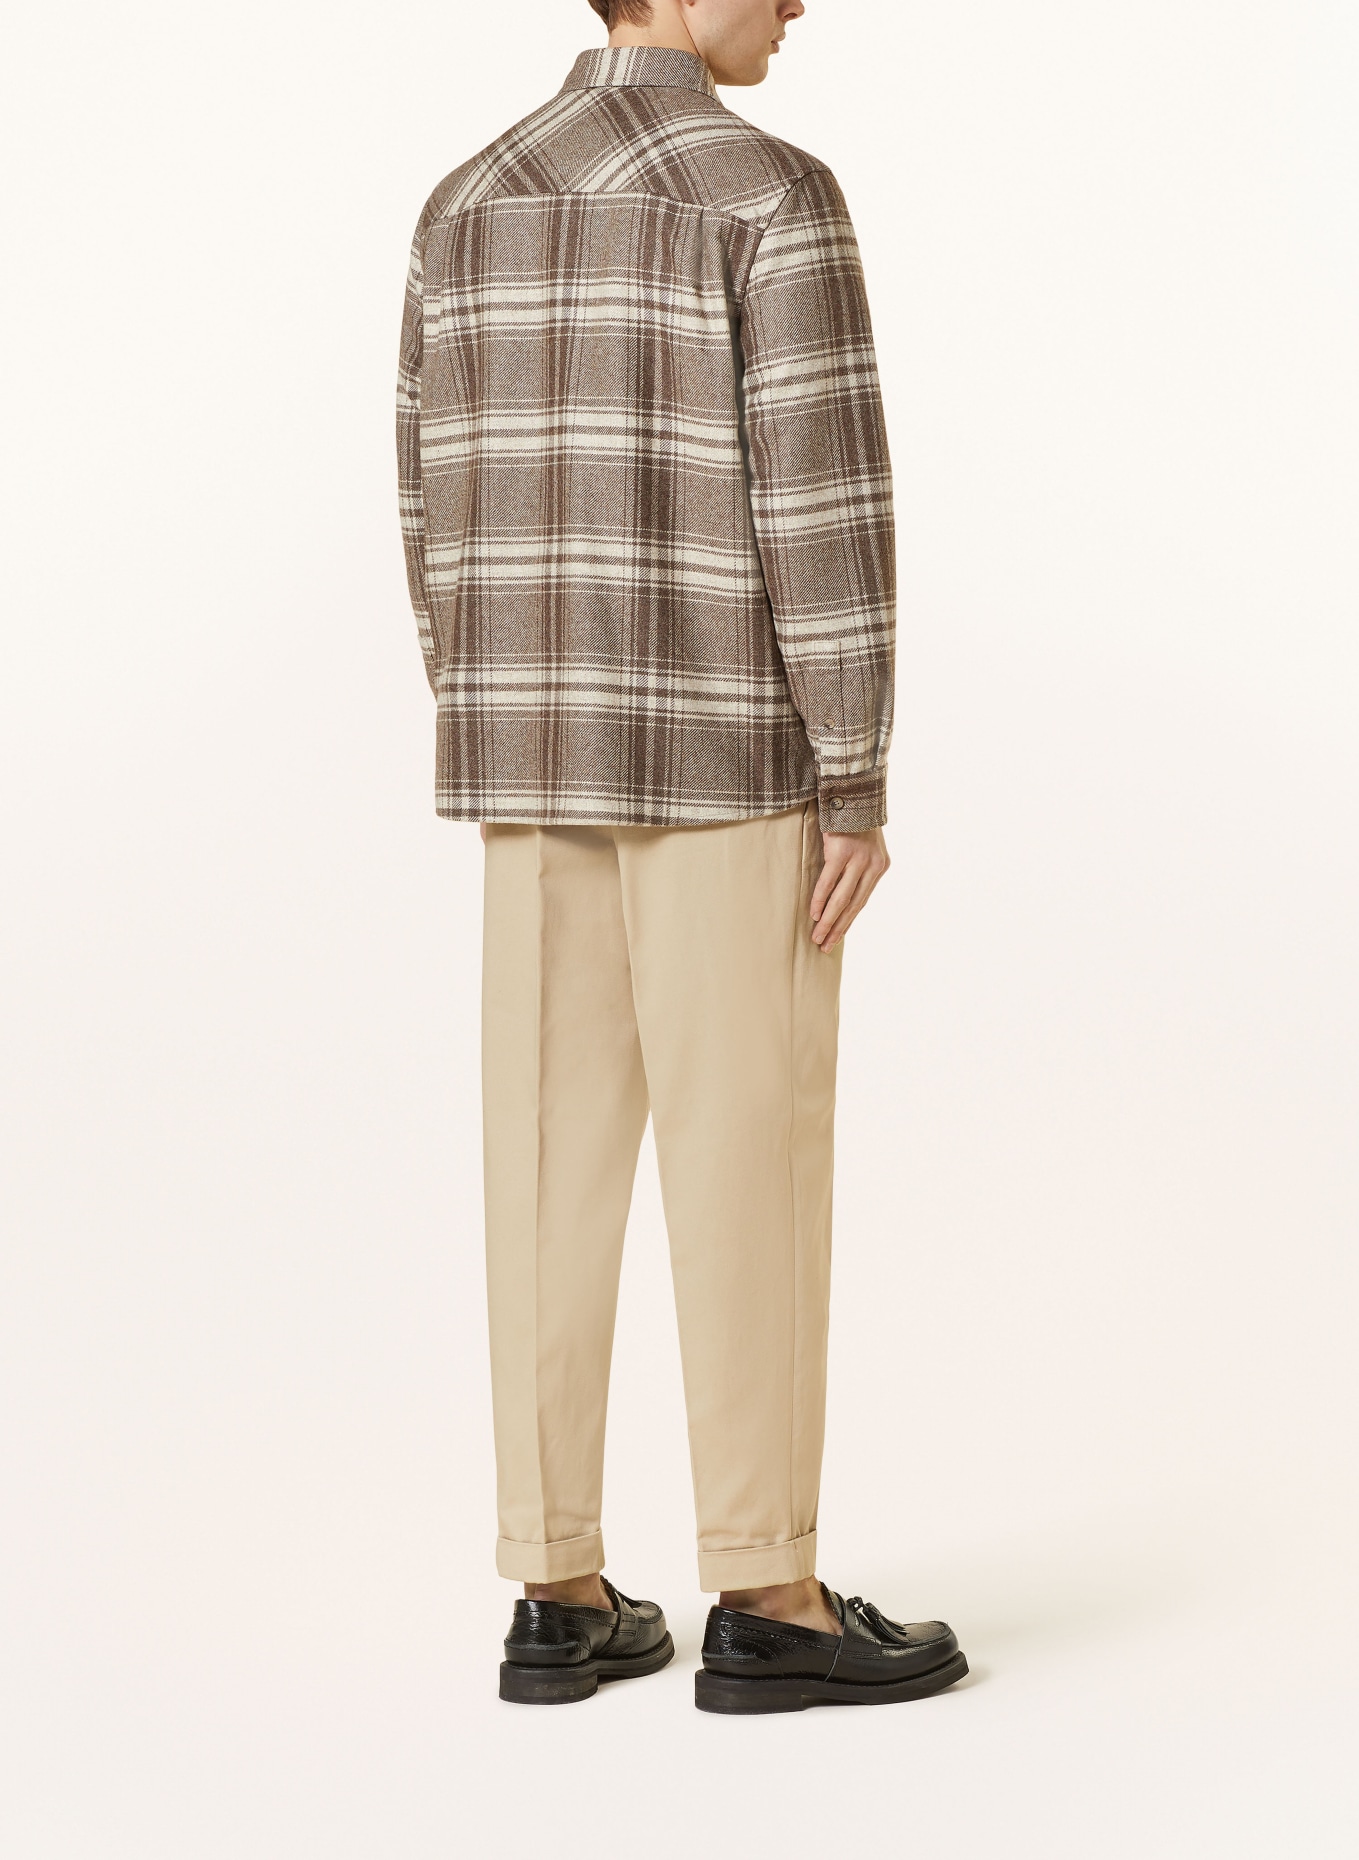 COS Flannel shirt relaxed fit, Color: BEIGE/ BROWN/ DARK BROWN (Image 3)